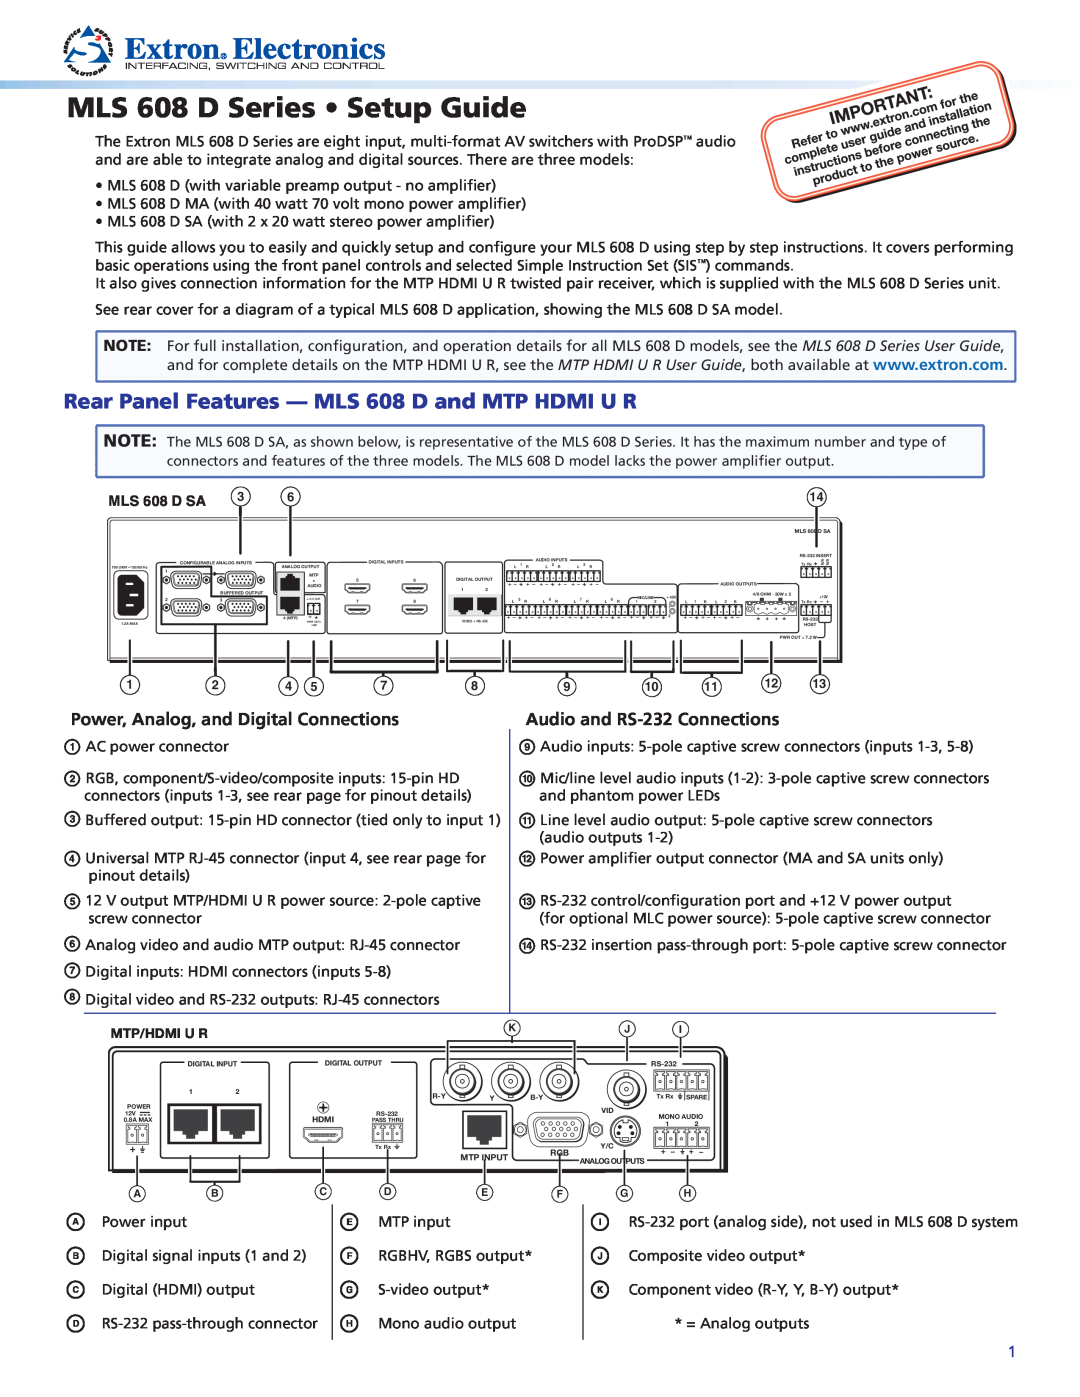 Extron electronic setup guide Rear Panel Features - MLS 608 D and MTP HDMI U R, Power, Analog, and Digital Connections 